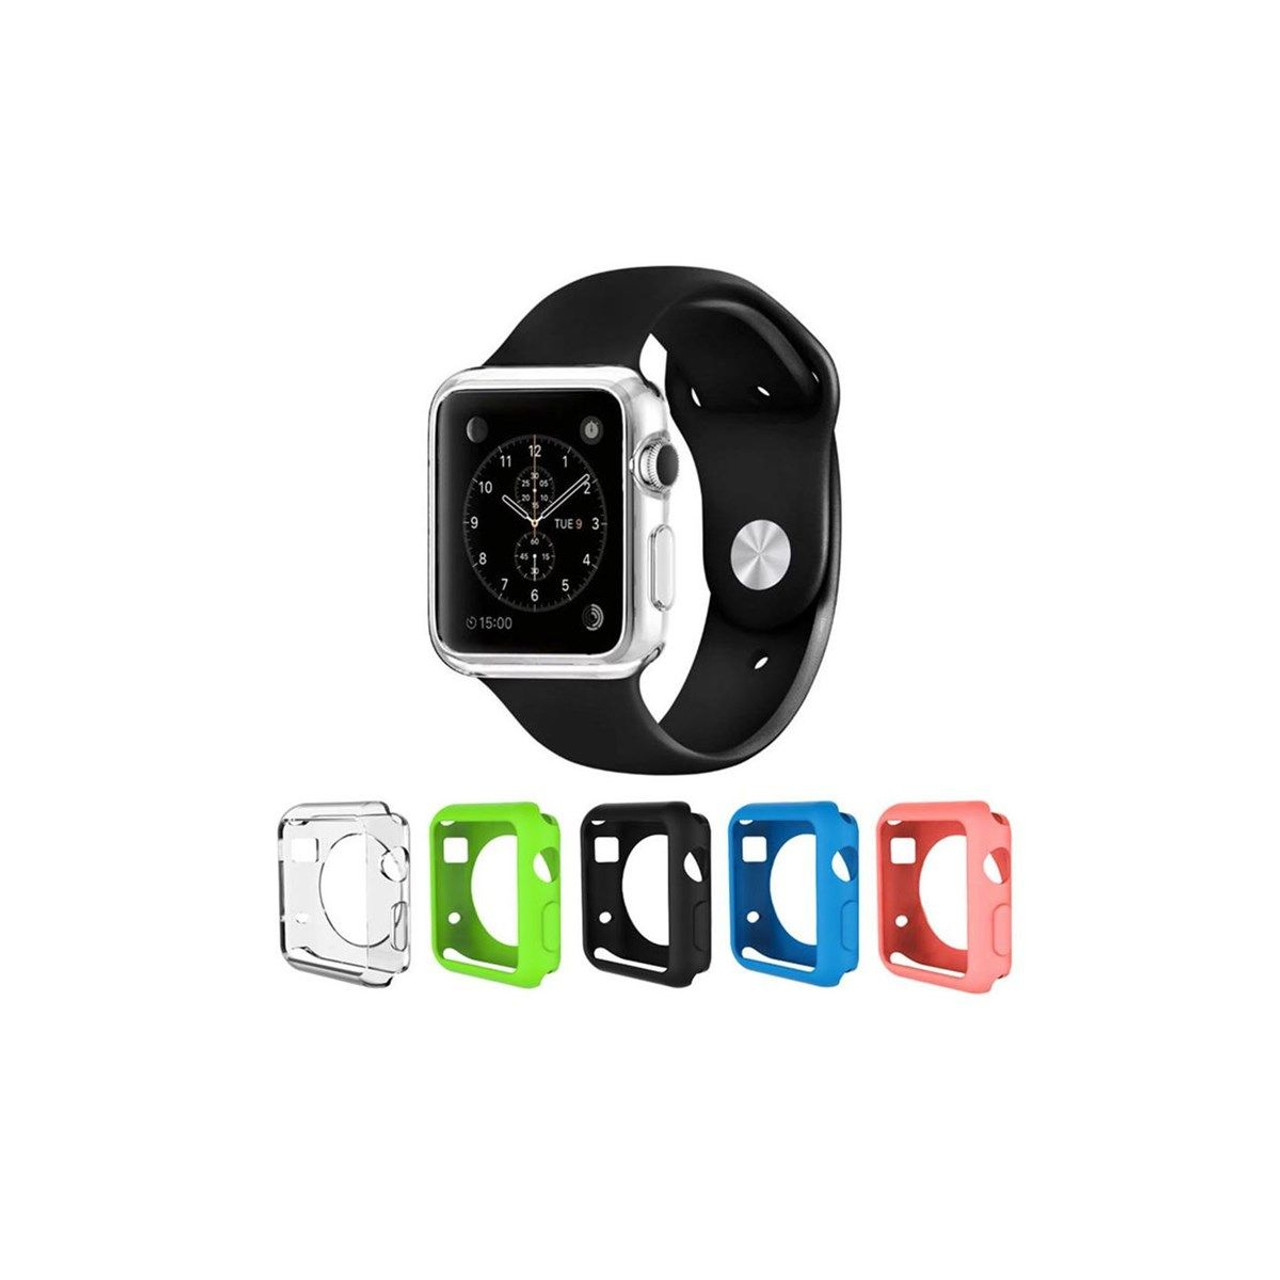 Screen Protectors for Apple Watch Series 1-5 (5-Pack) product image